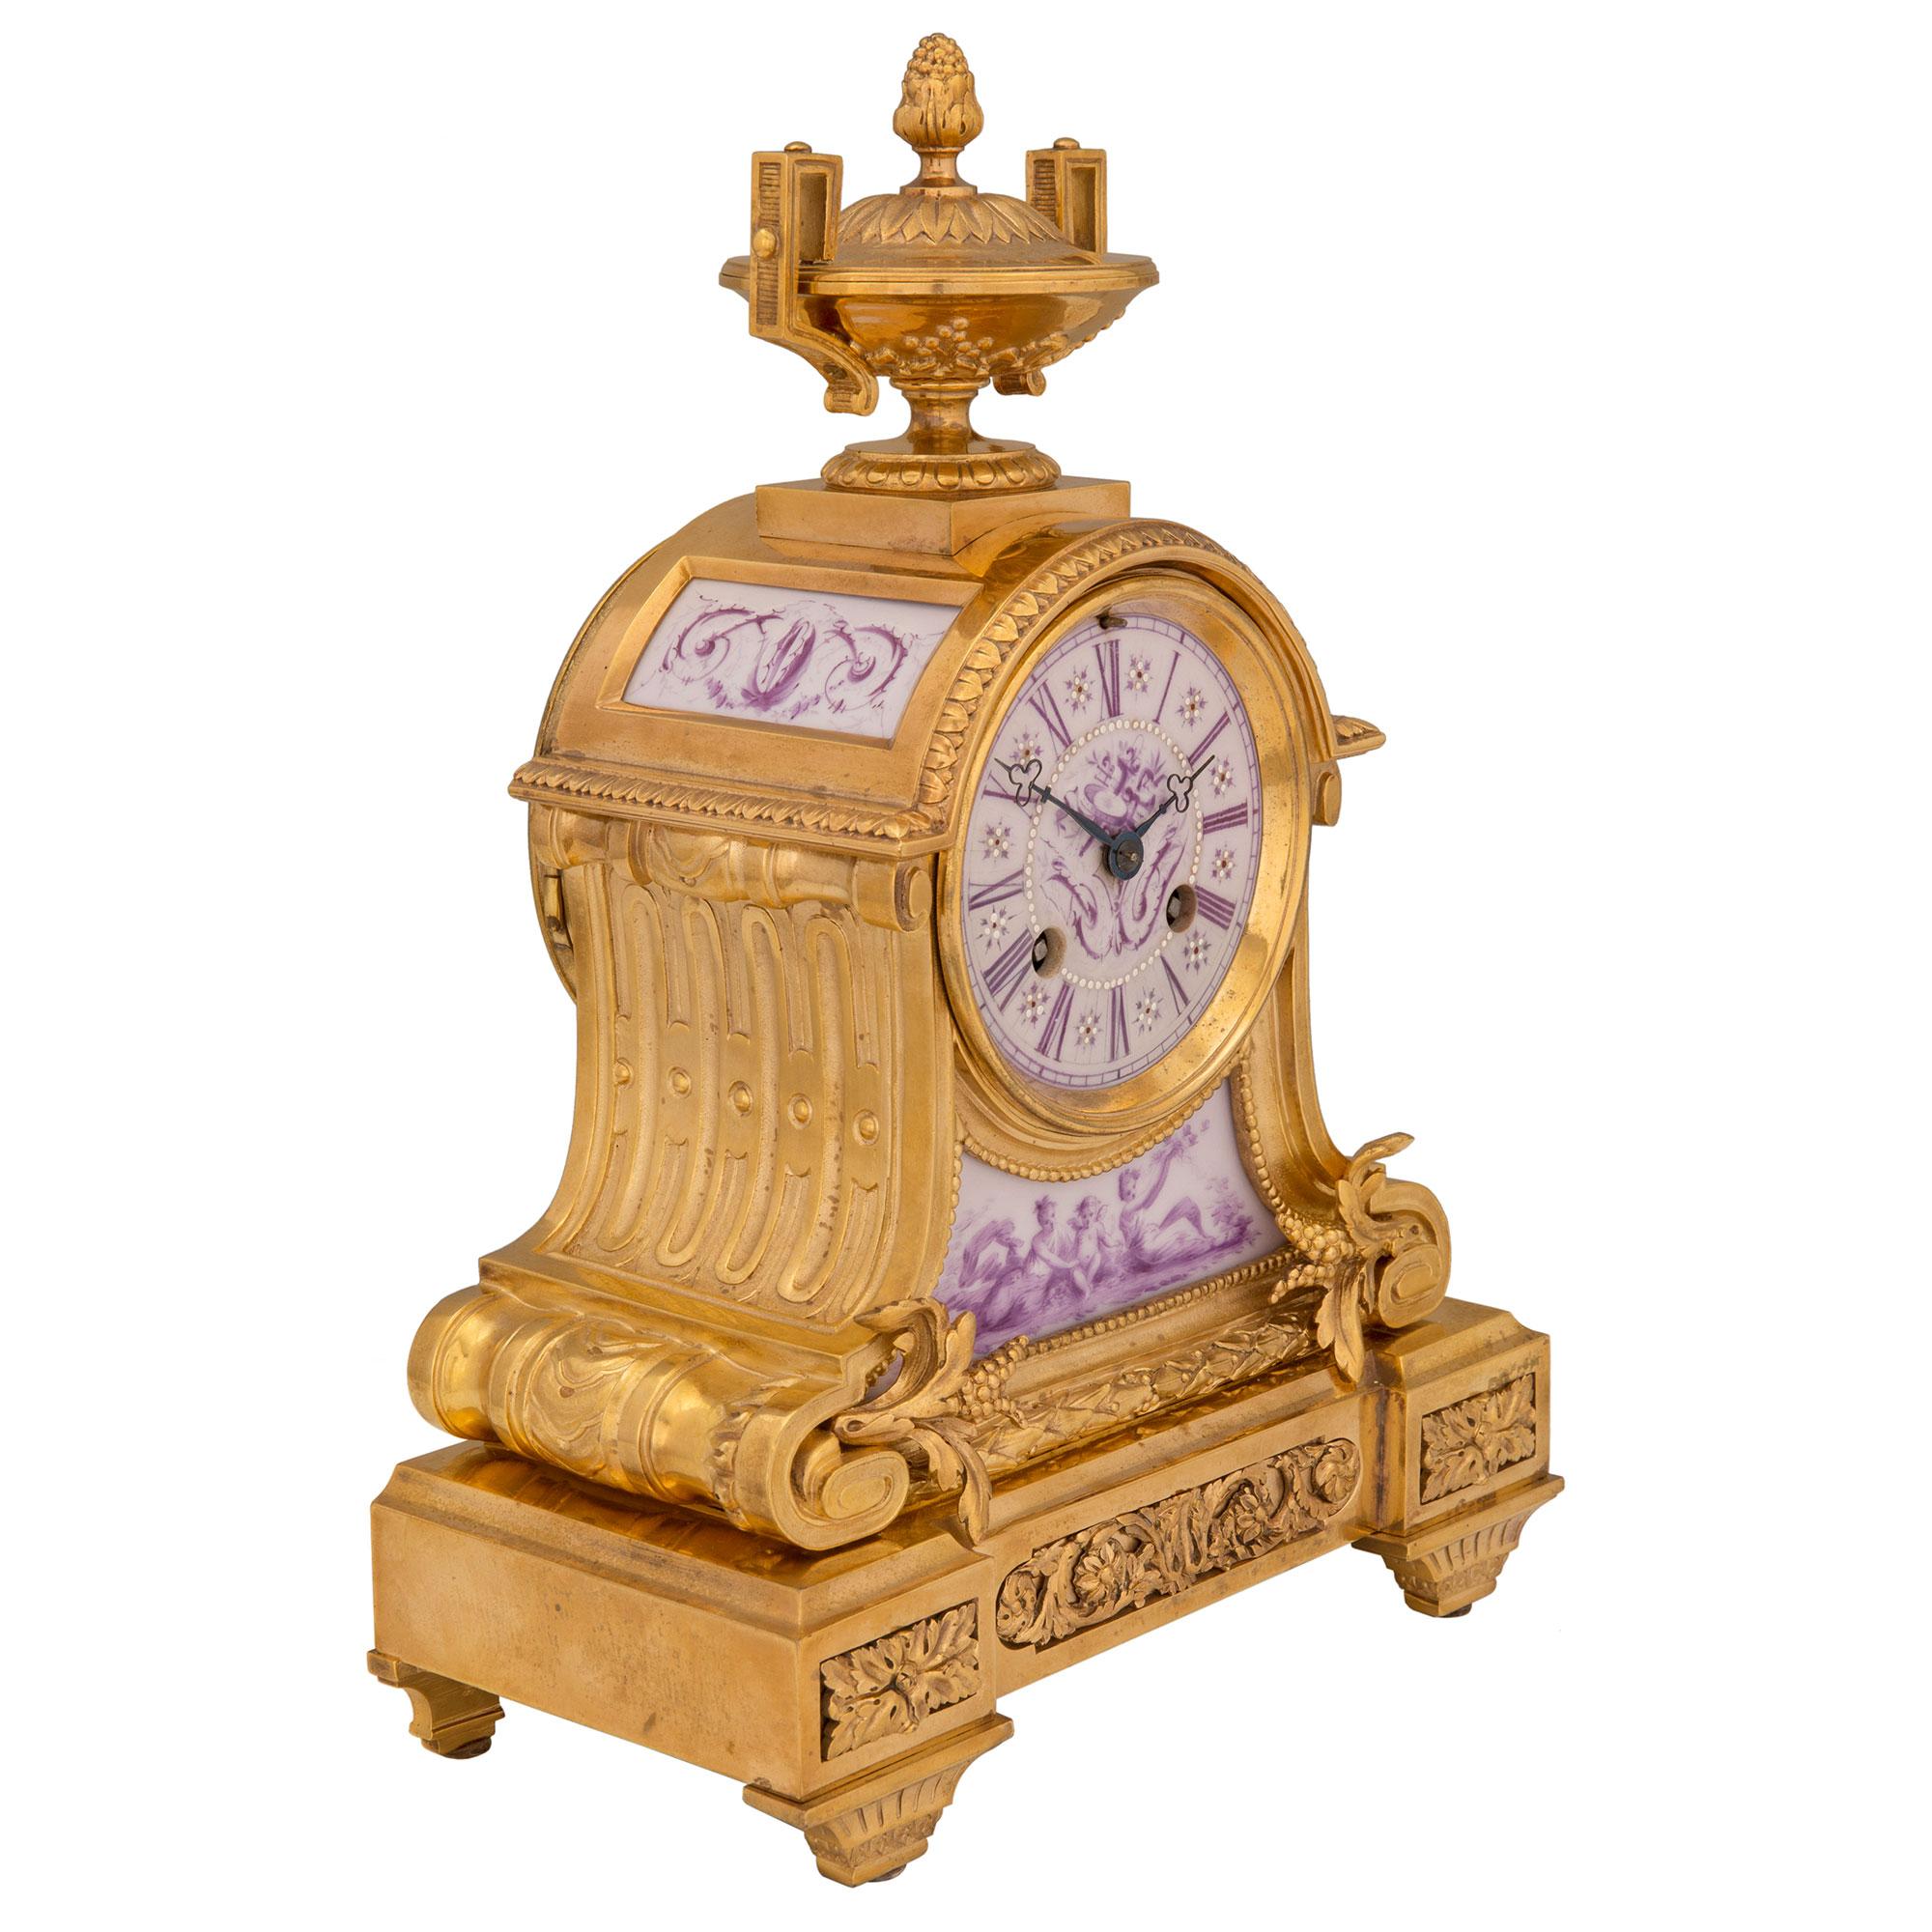 An elegant French 19th century Louis XVI St. ormolu and porcelain clock. The small scale clock is raised by fine tapered fluted legs below striking richly chased block rosettes centering a lovely pierced rinceau shaped fitted ormolu plaque. The